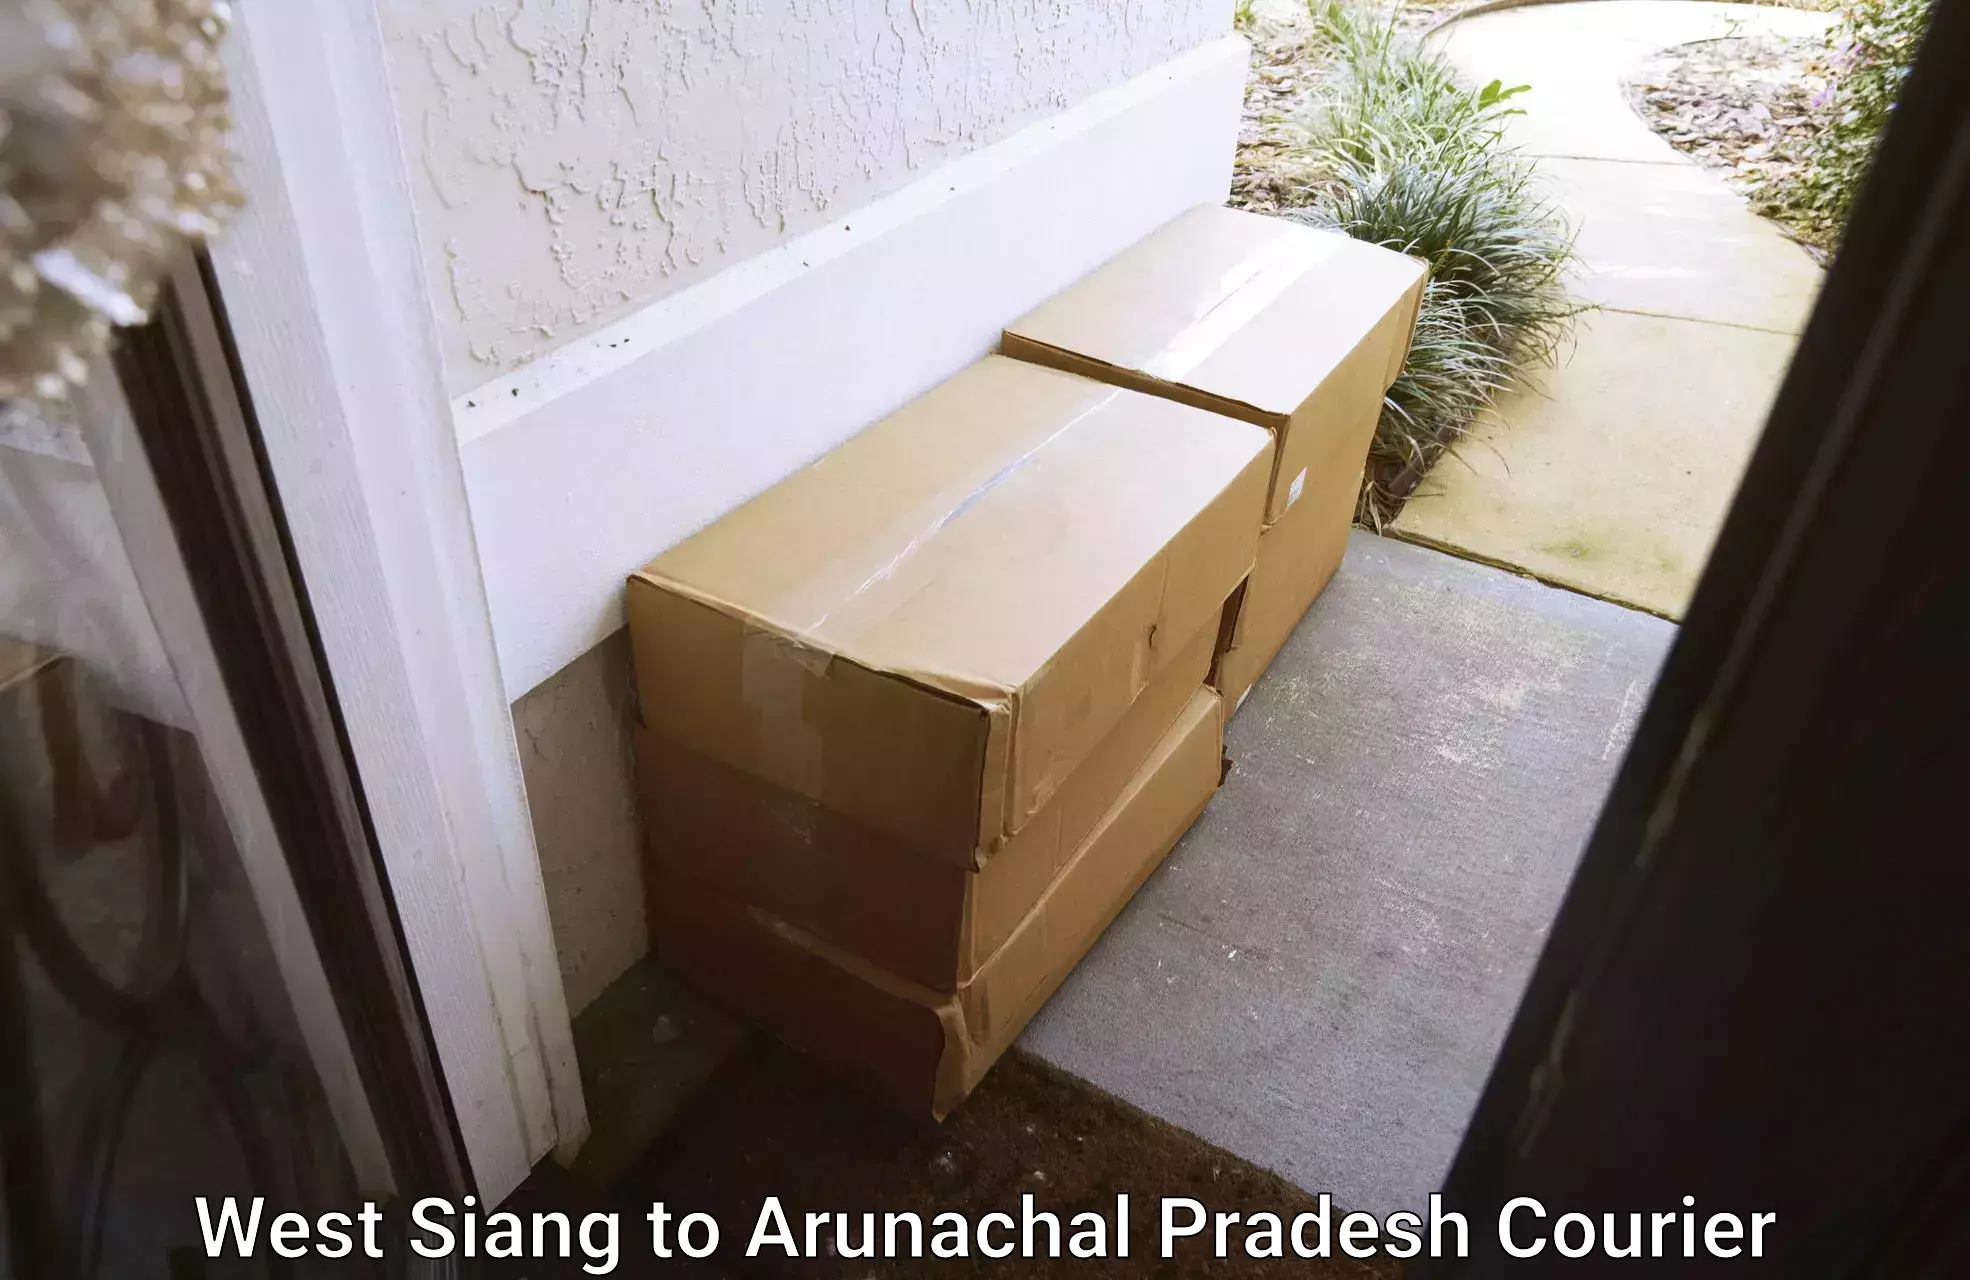 Round-the-clock parcel delivery in West Siang to Lohit